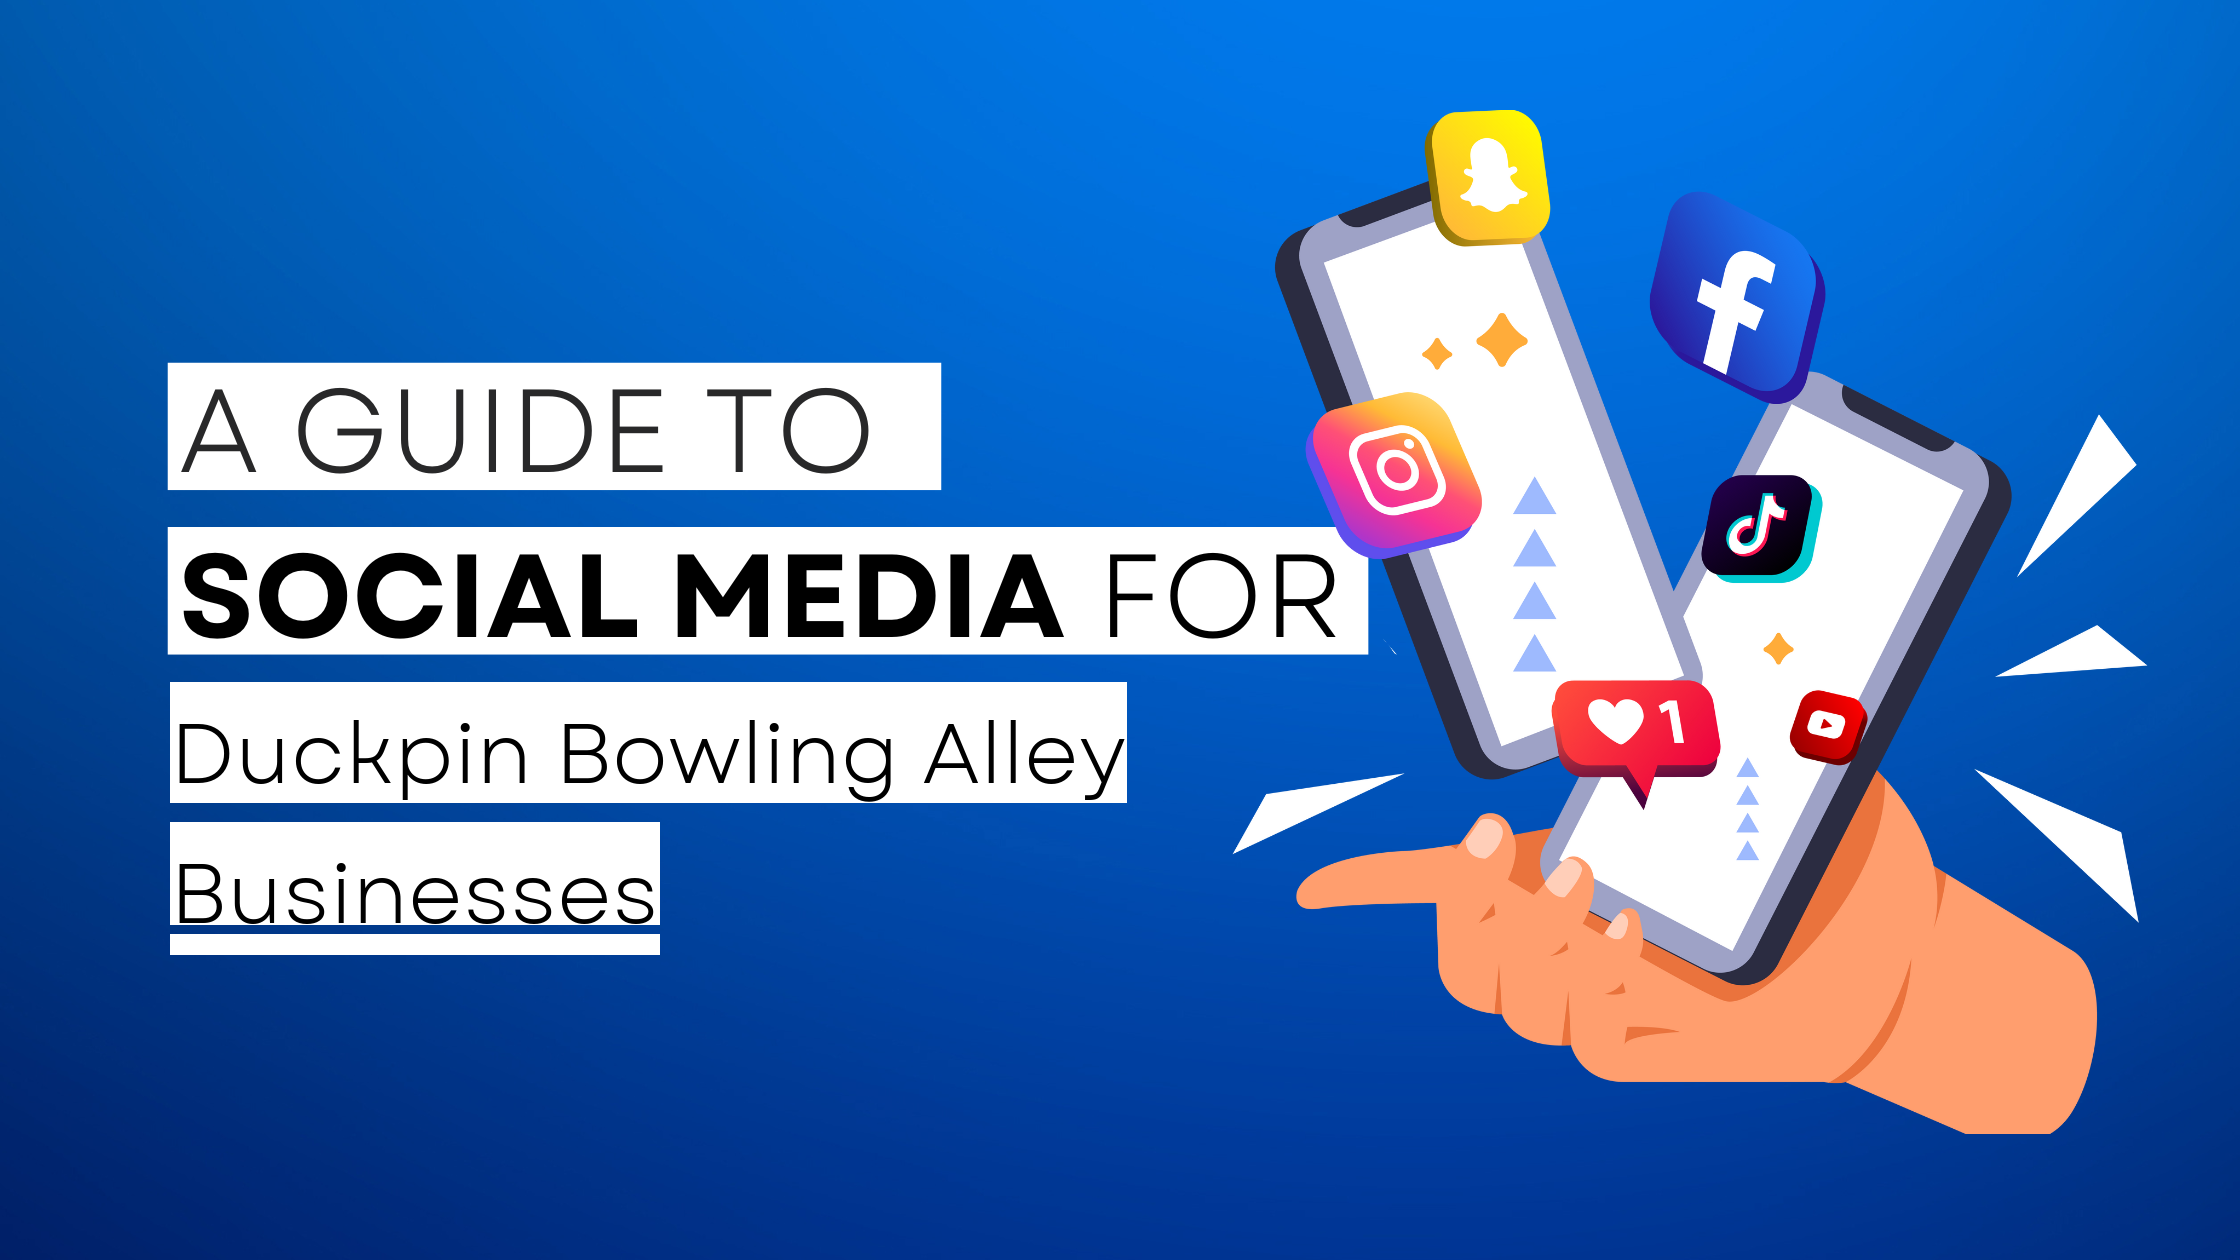 How to start Duckpin Bowling Alley  on social media